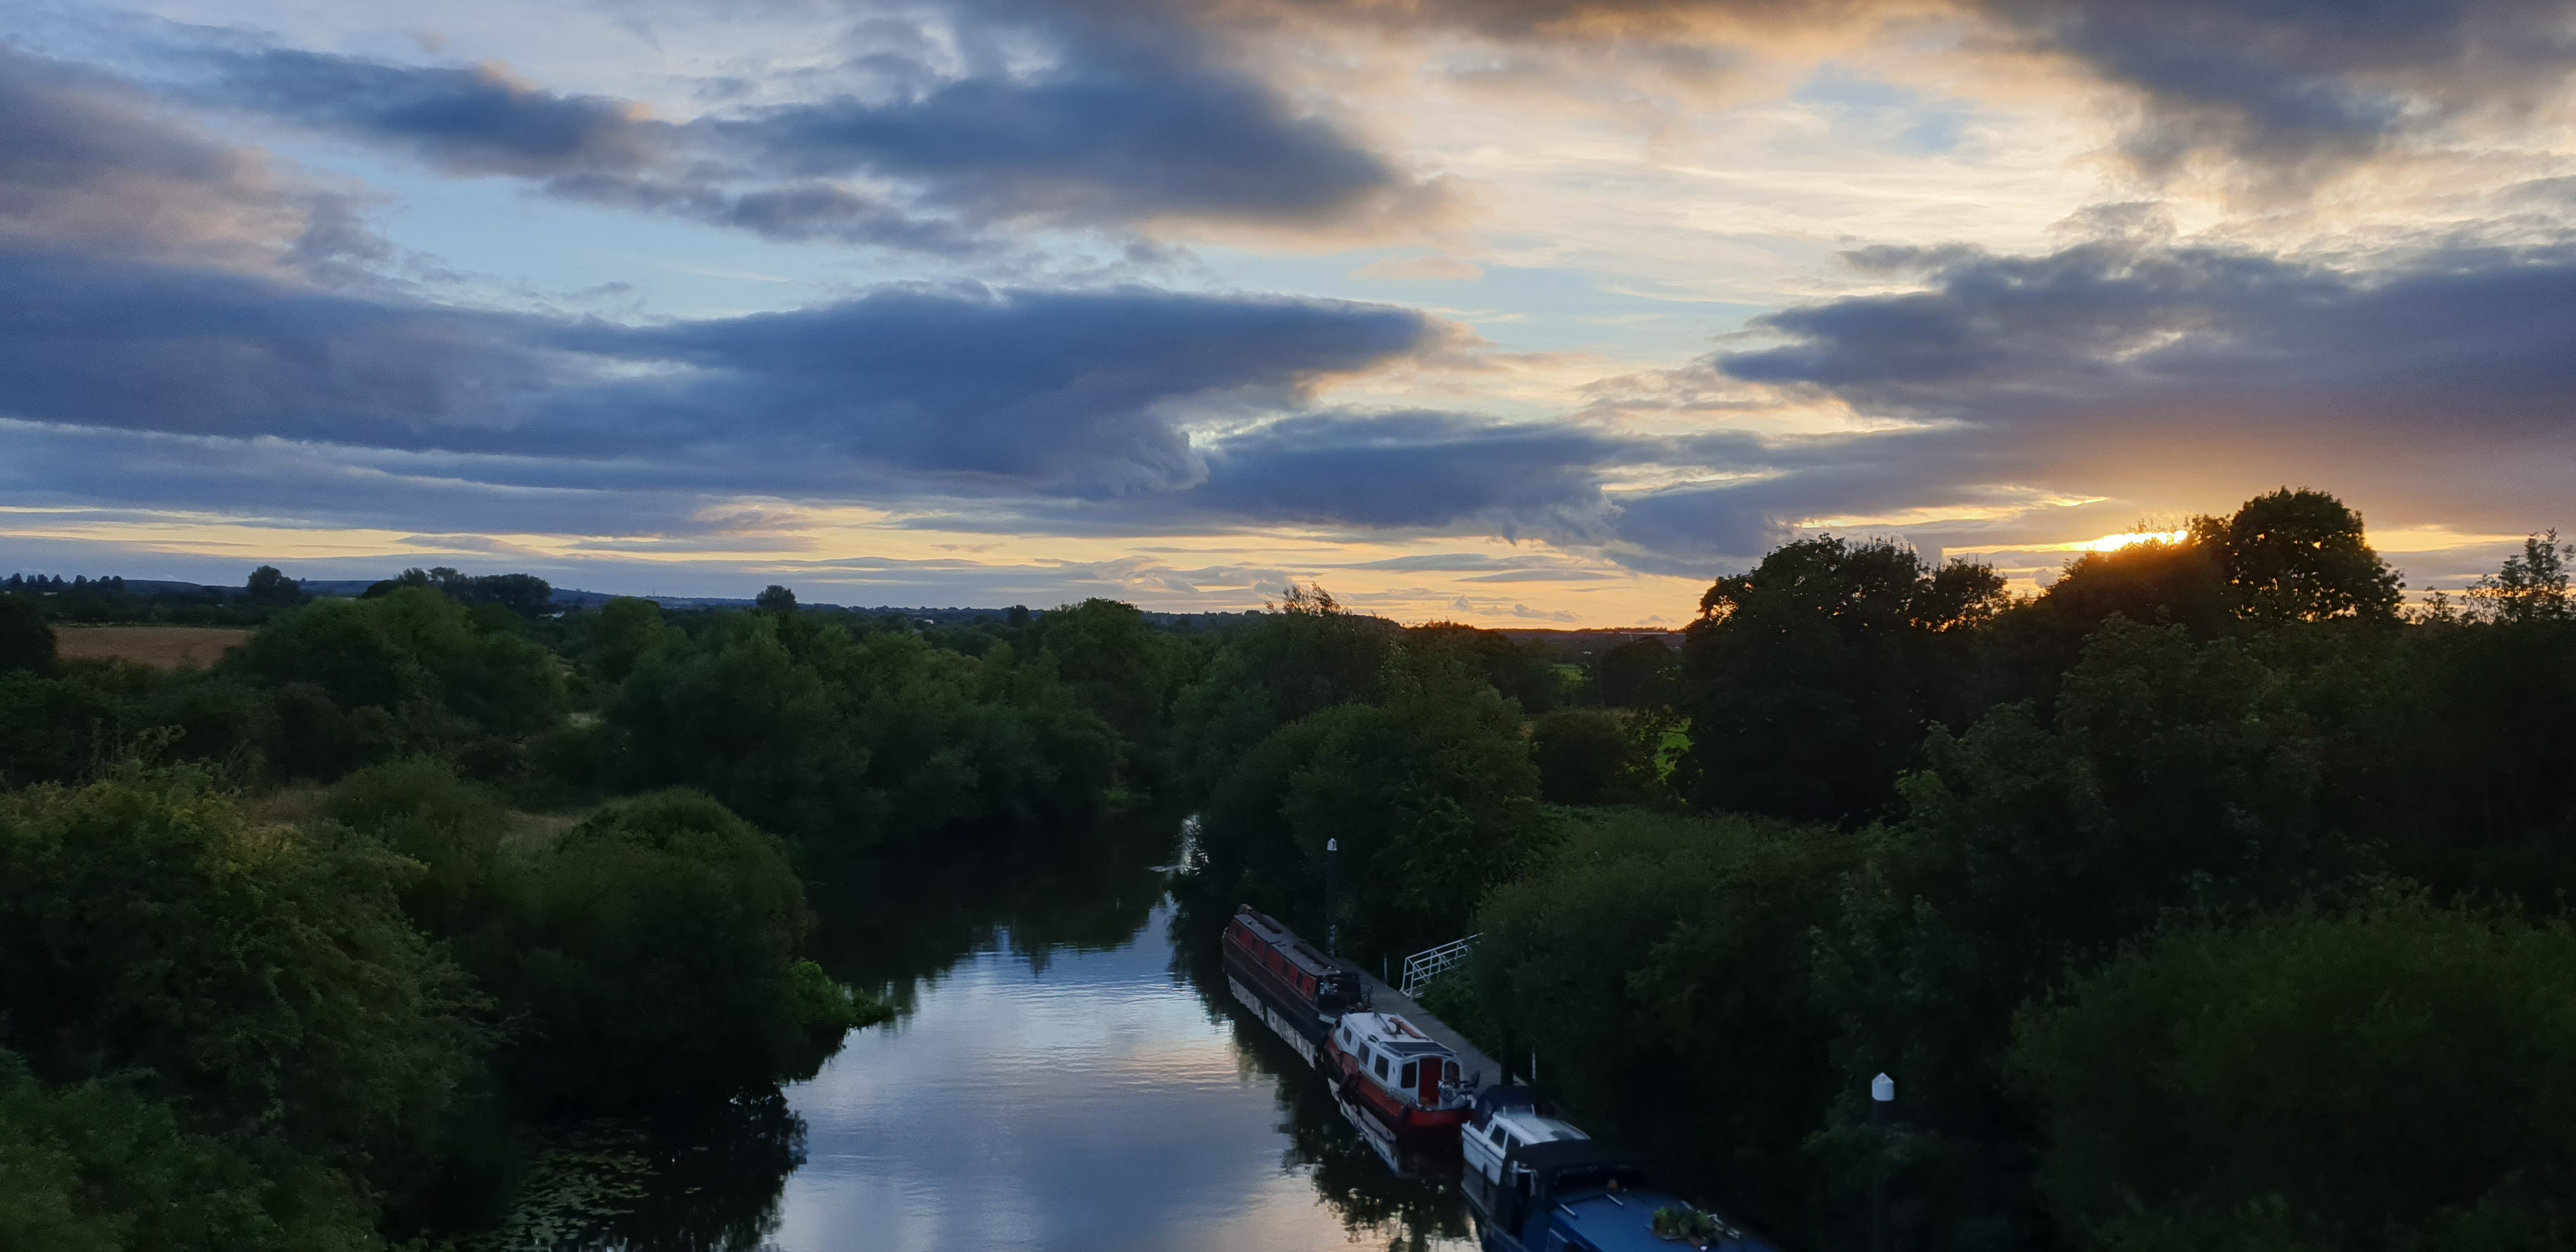 a photo of the river avon at dusk with the blue/orangesky and clouds reflecting on the calm surface